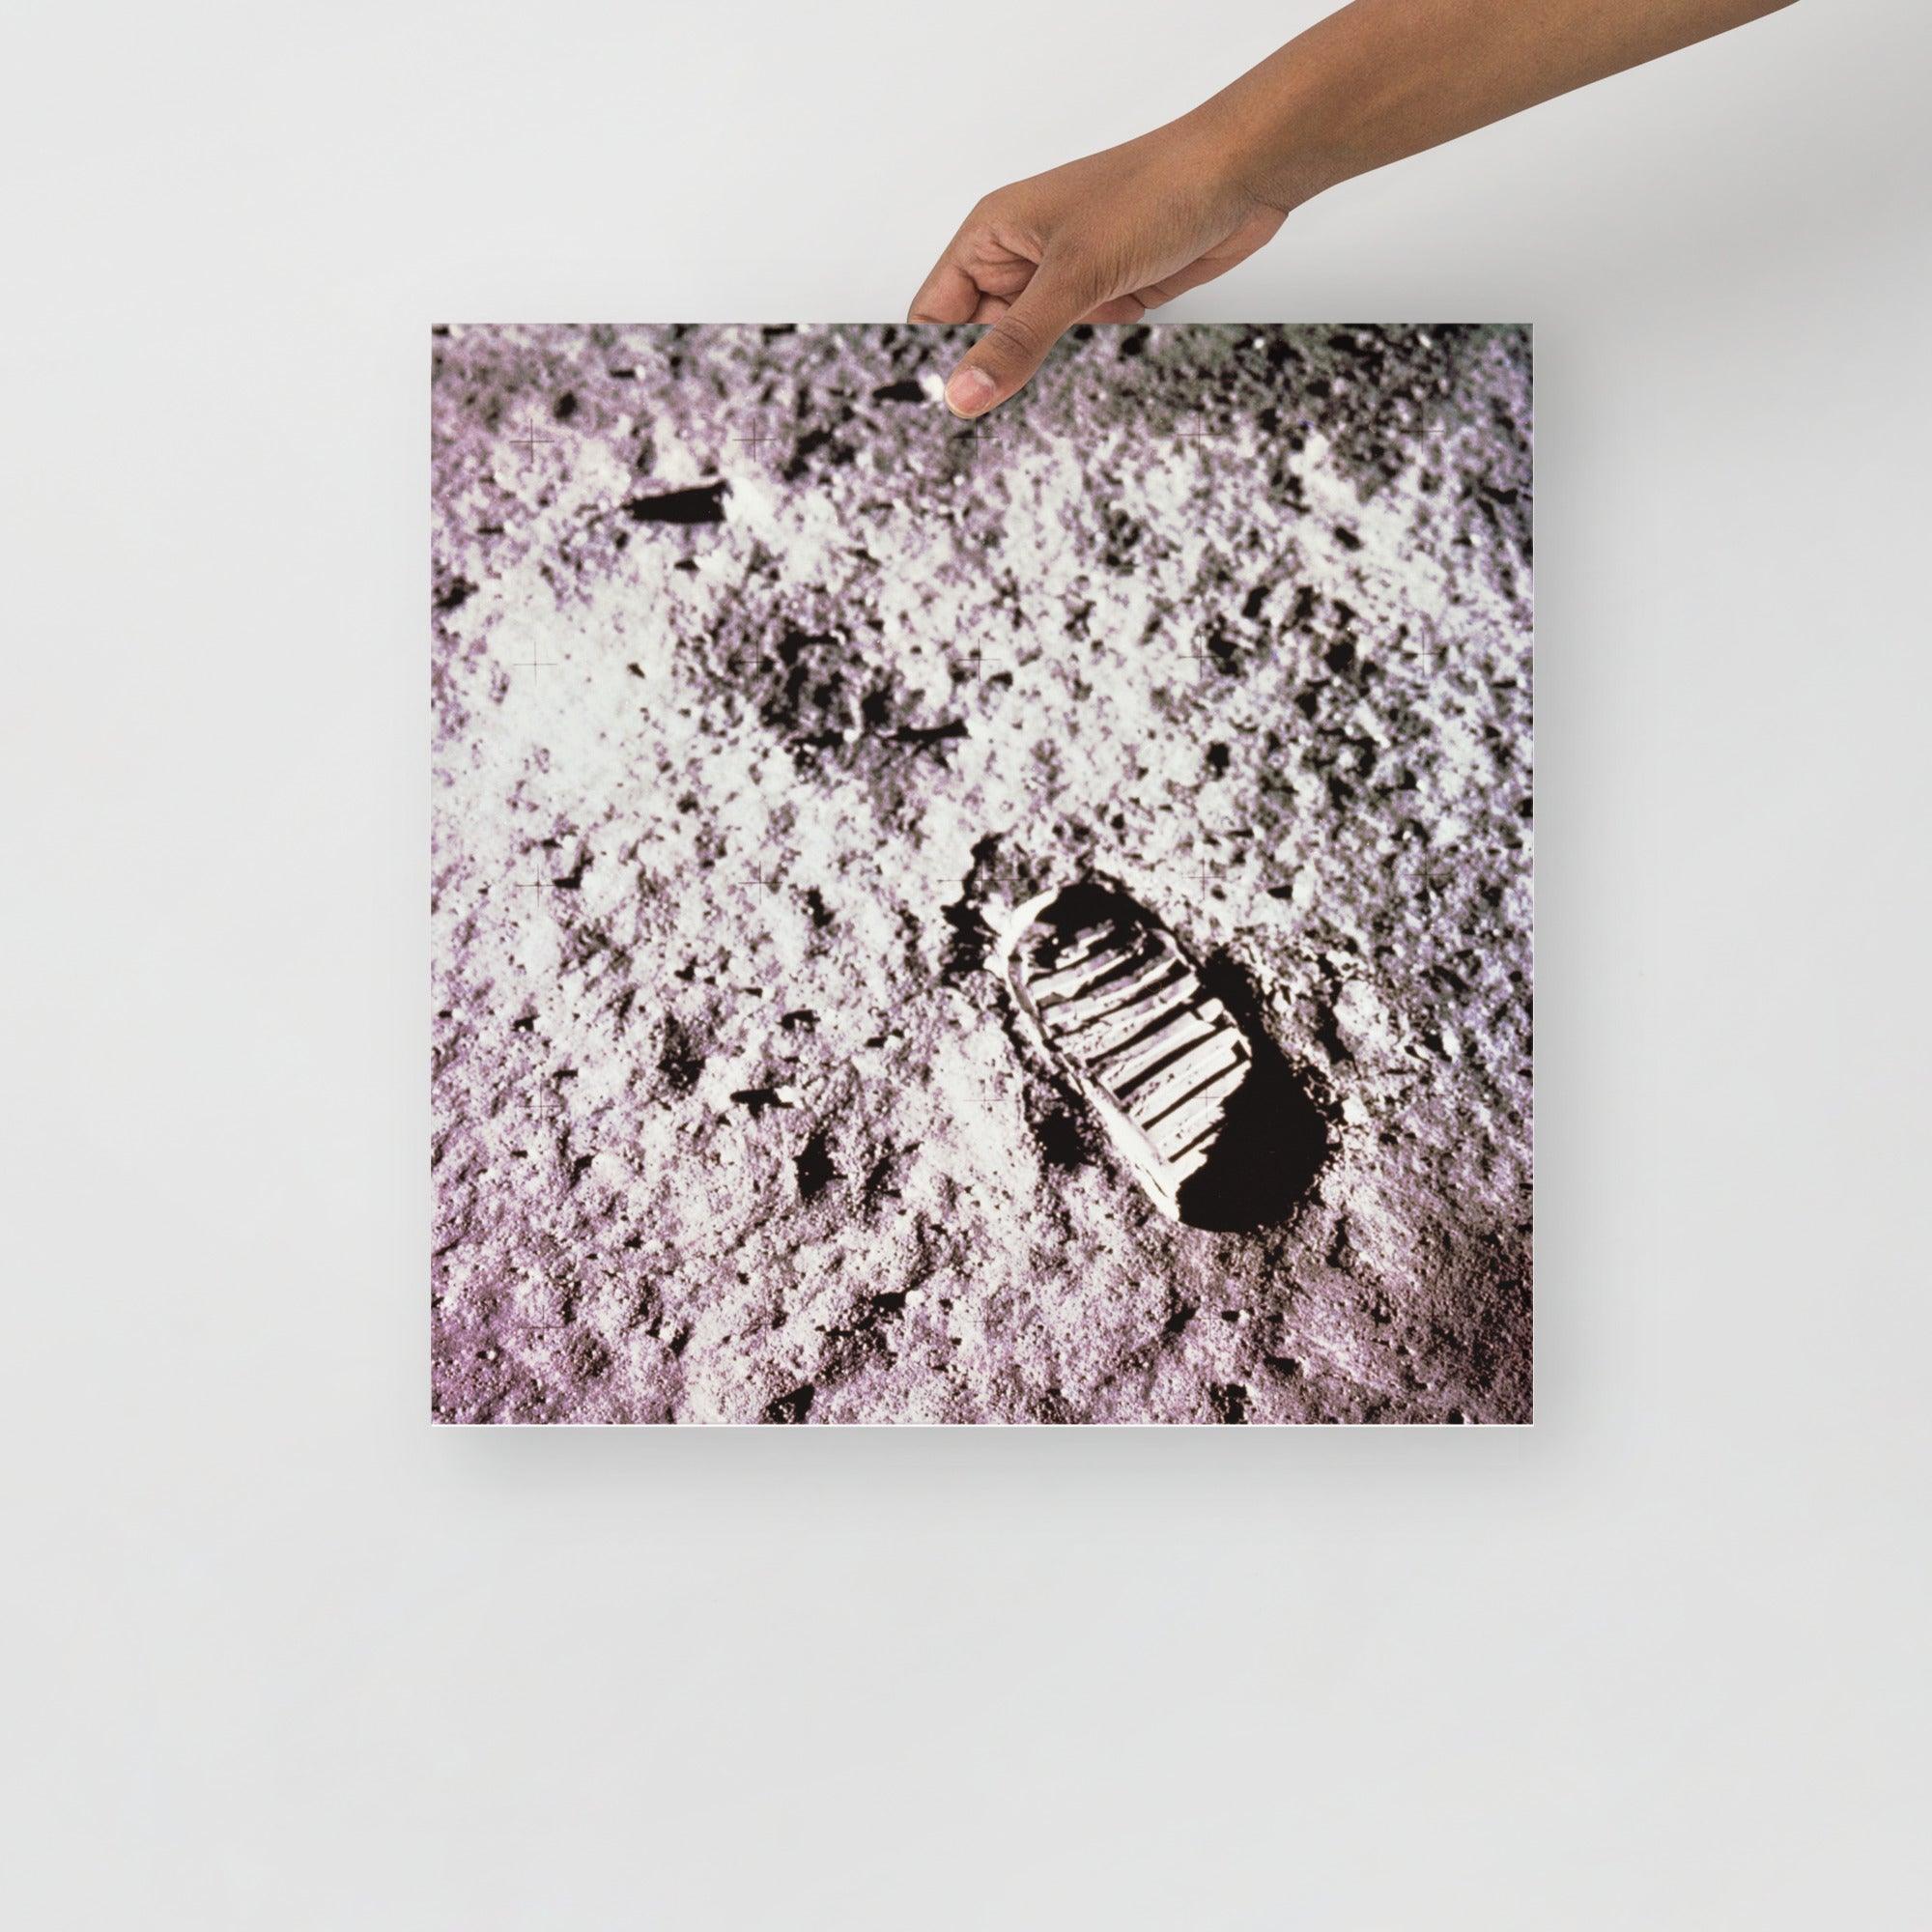 A Footprint on the Moon Apollo 11 poster on a plain backdrop in size 16x16”.